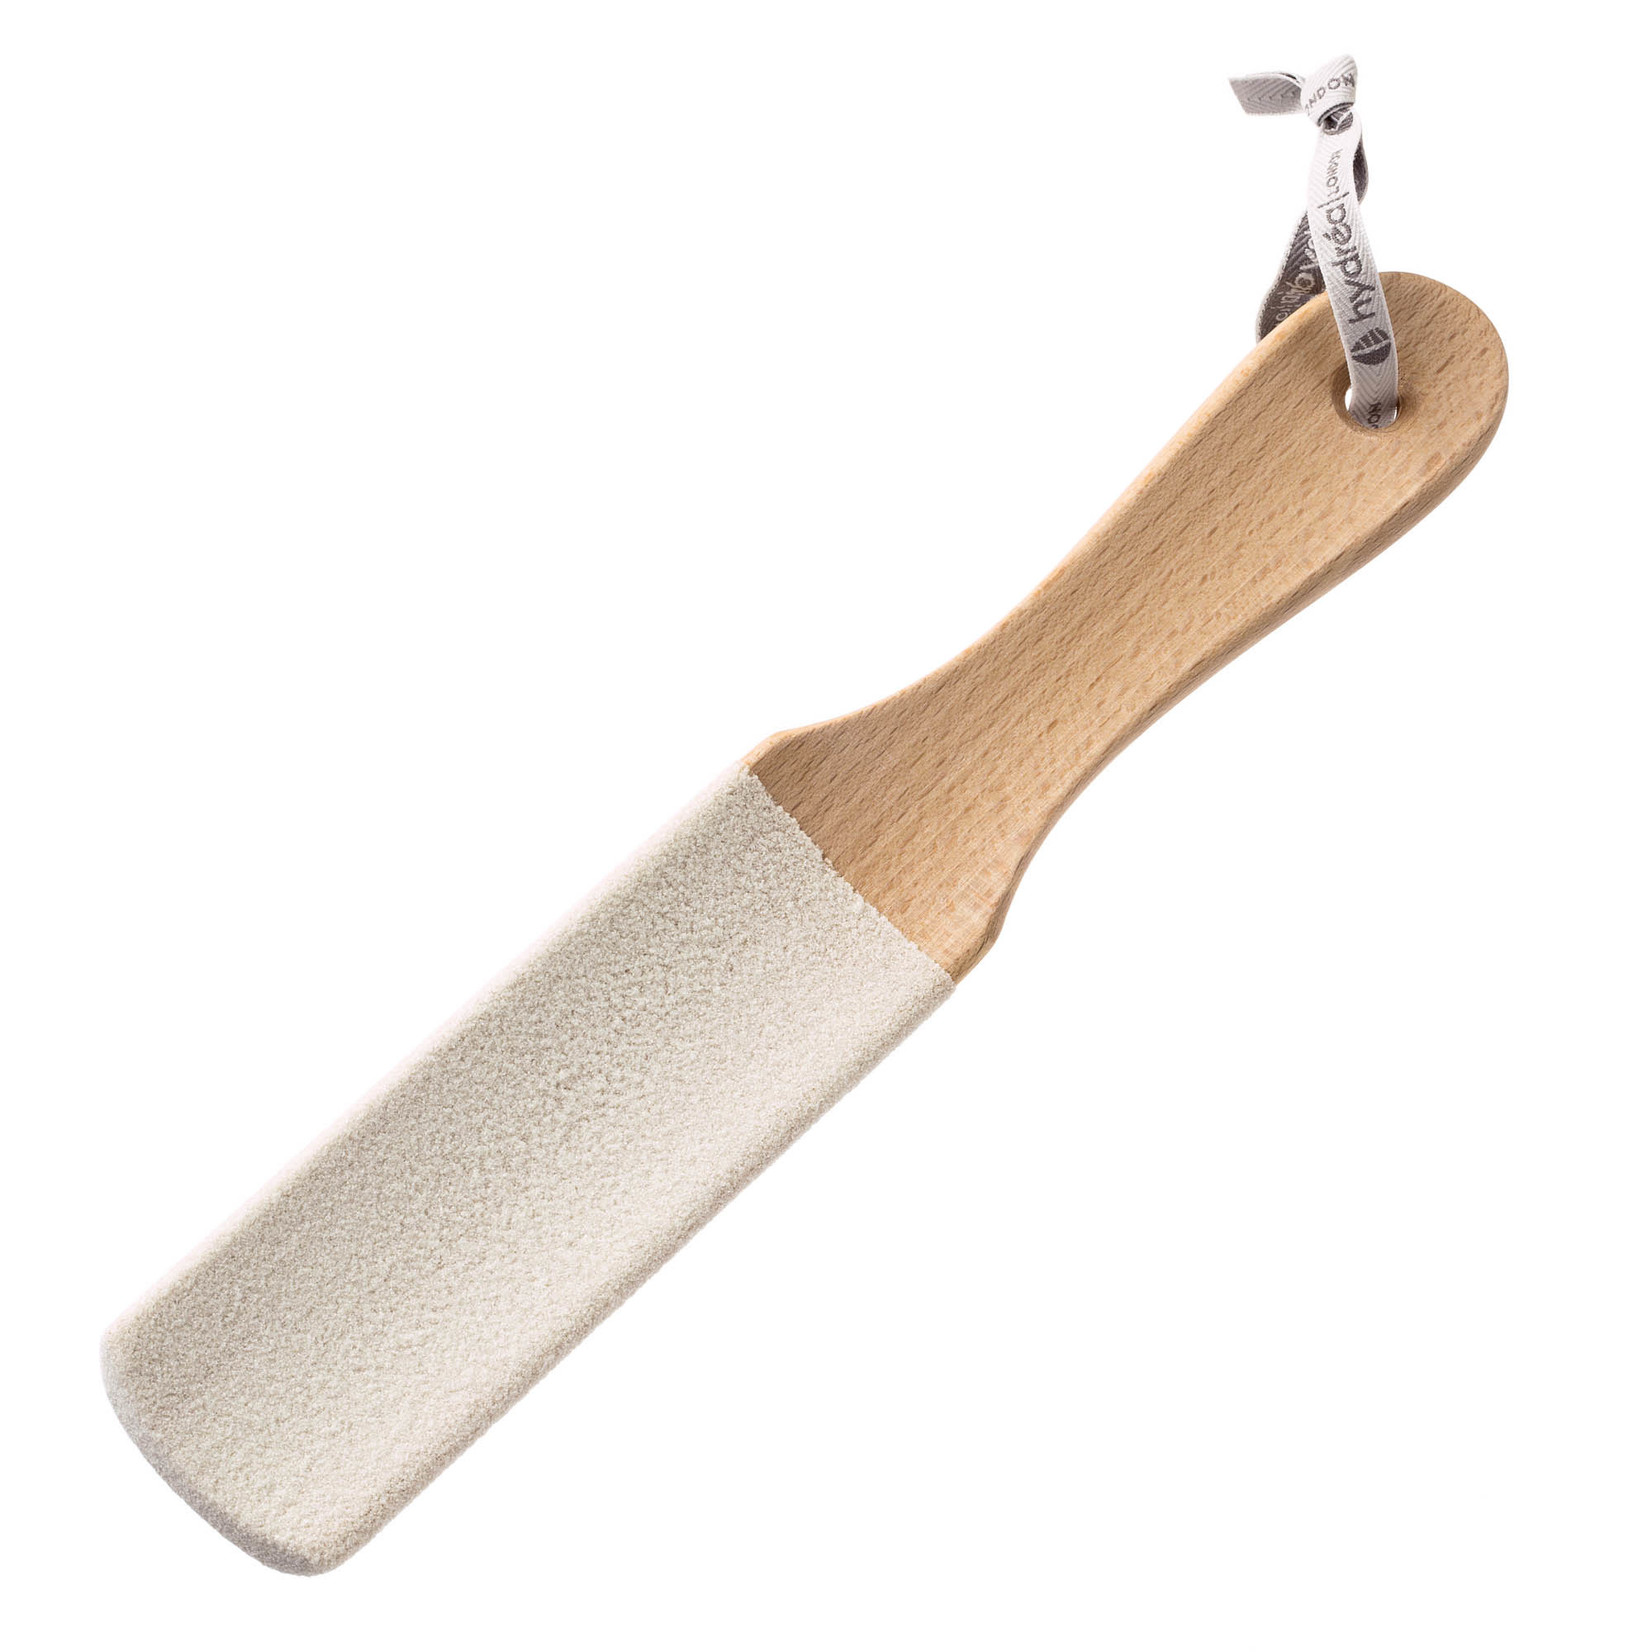 Hydrea Curved Wooden Foot File with Ceramic Micro Crystals